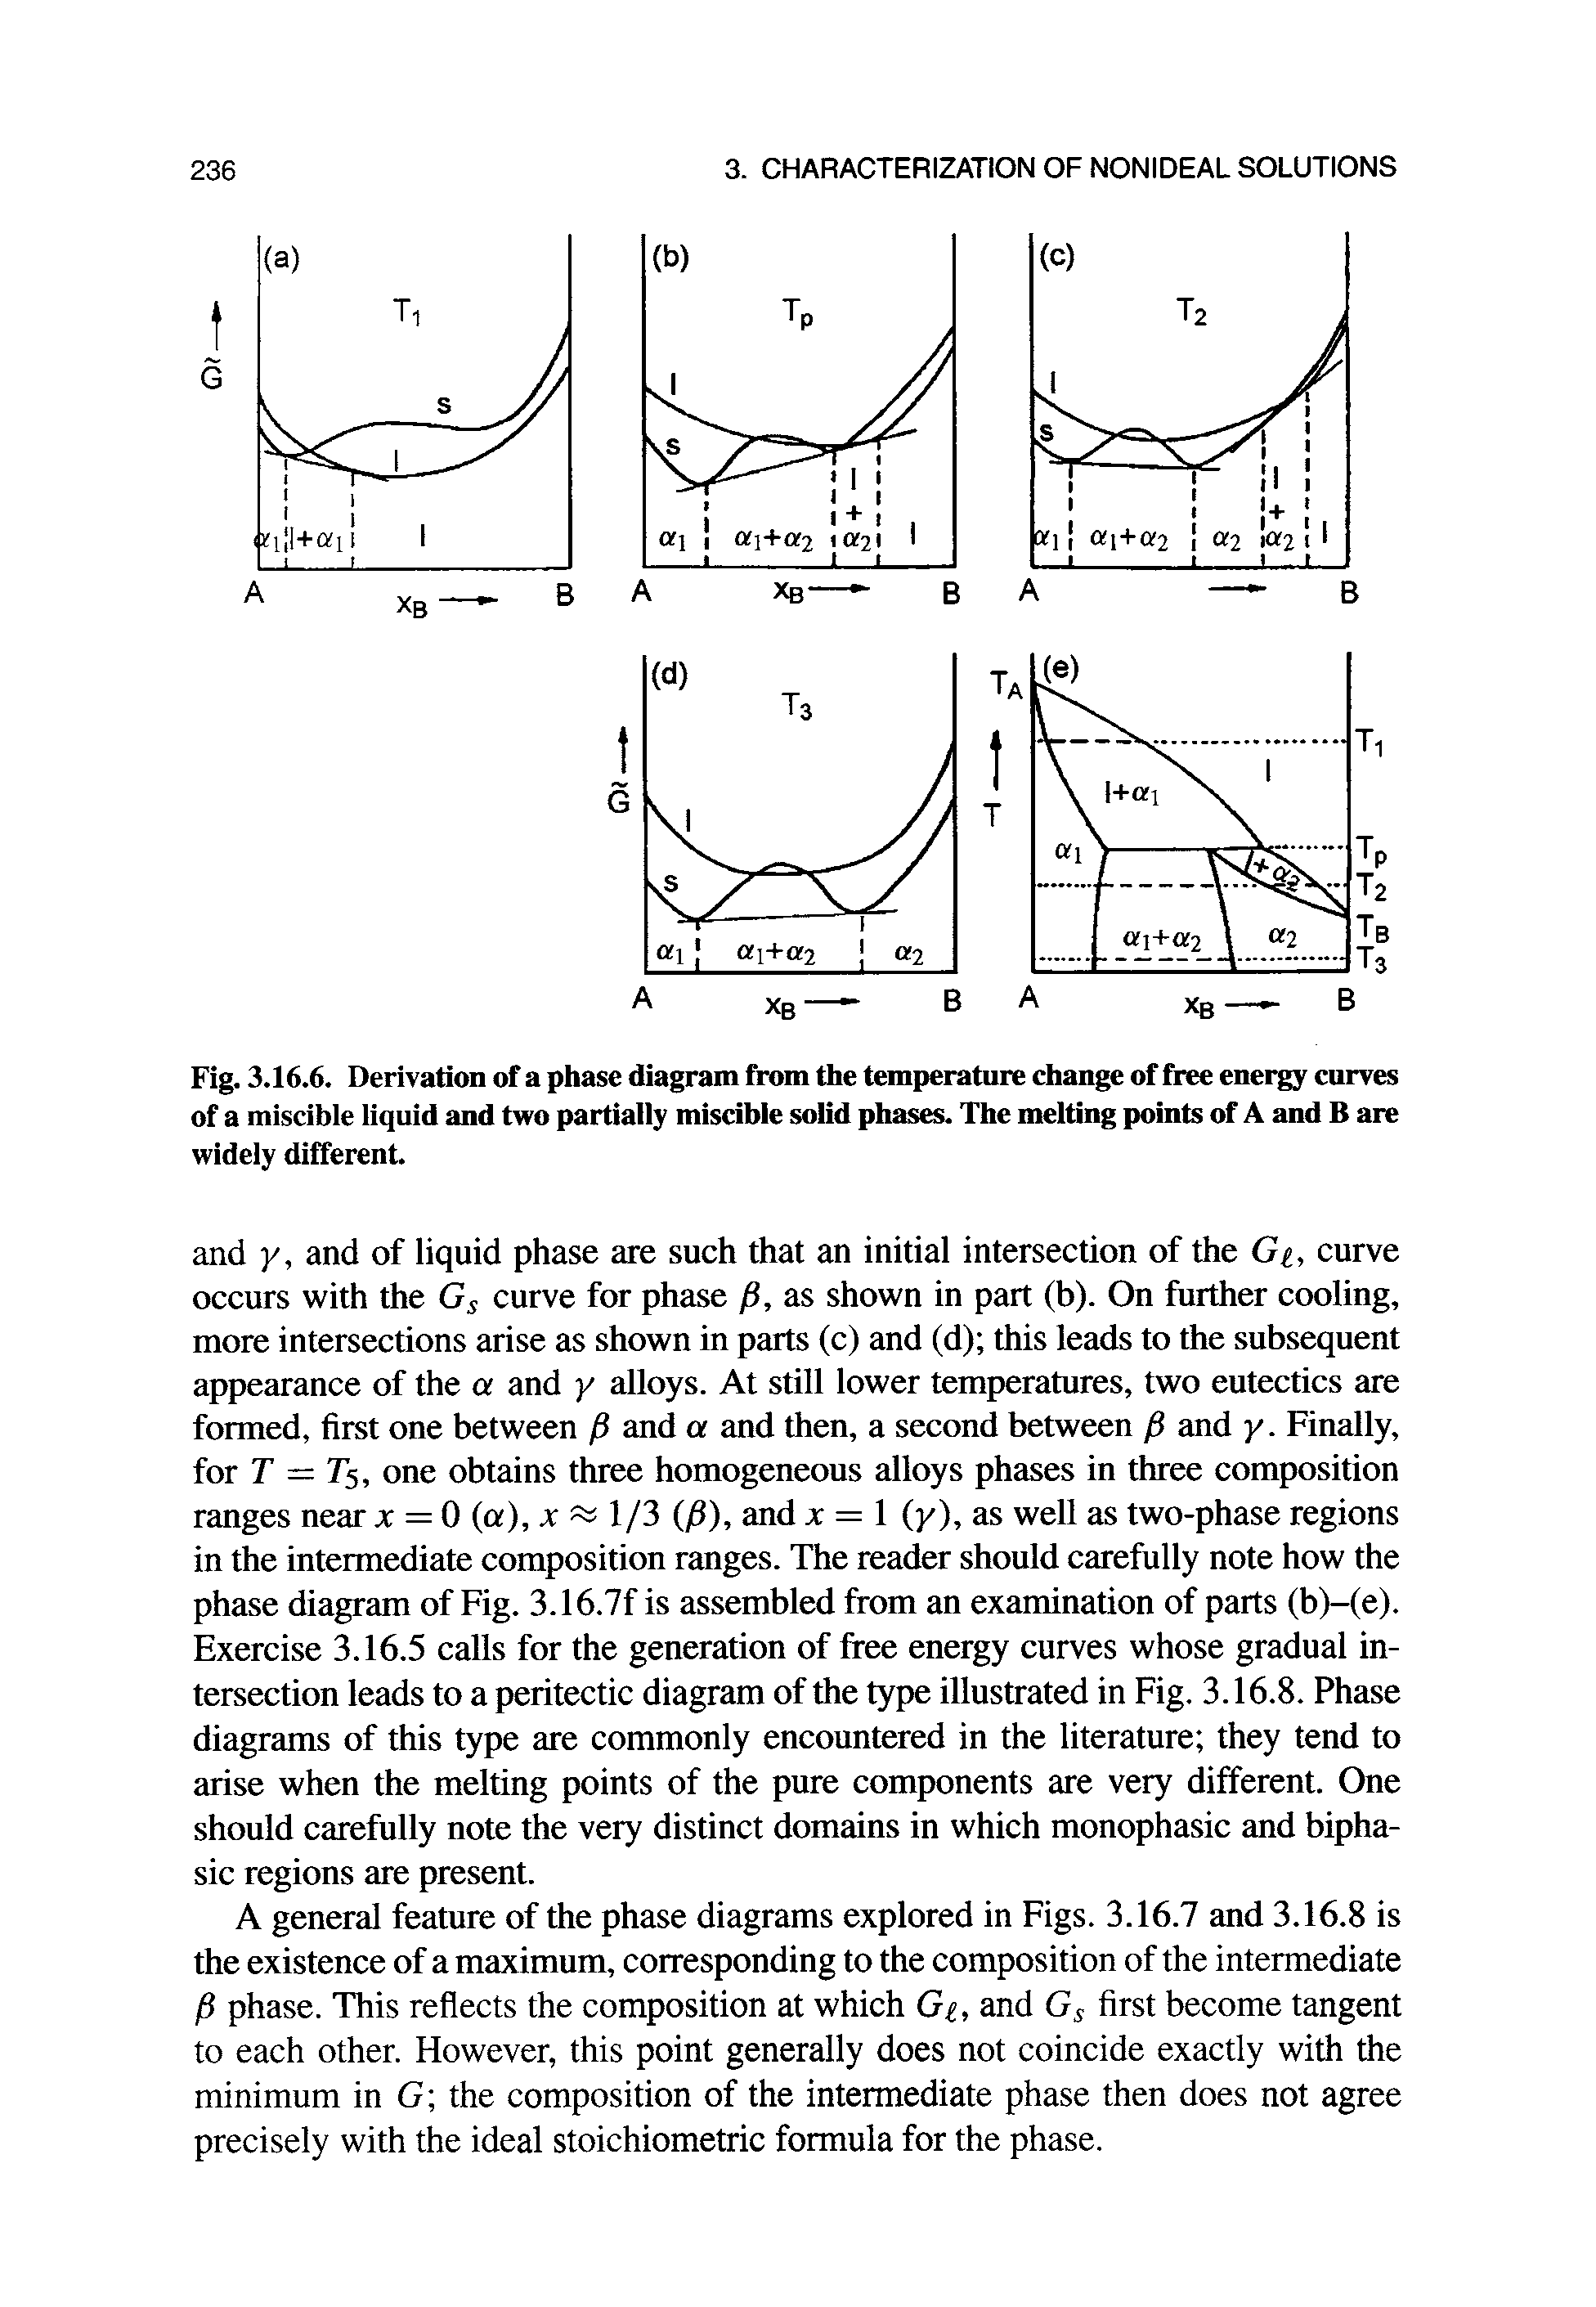 Fig. 3.16.6. Derivation of a phase diagram from the temperature change of free energy curves of a miscible liquid and two partially miscible solid phases. The melting points of A and B are widely different.